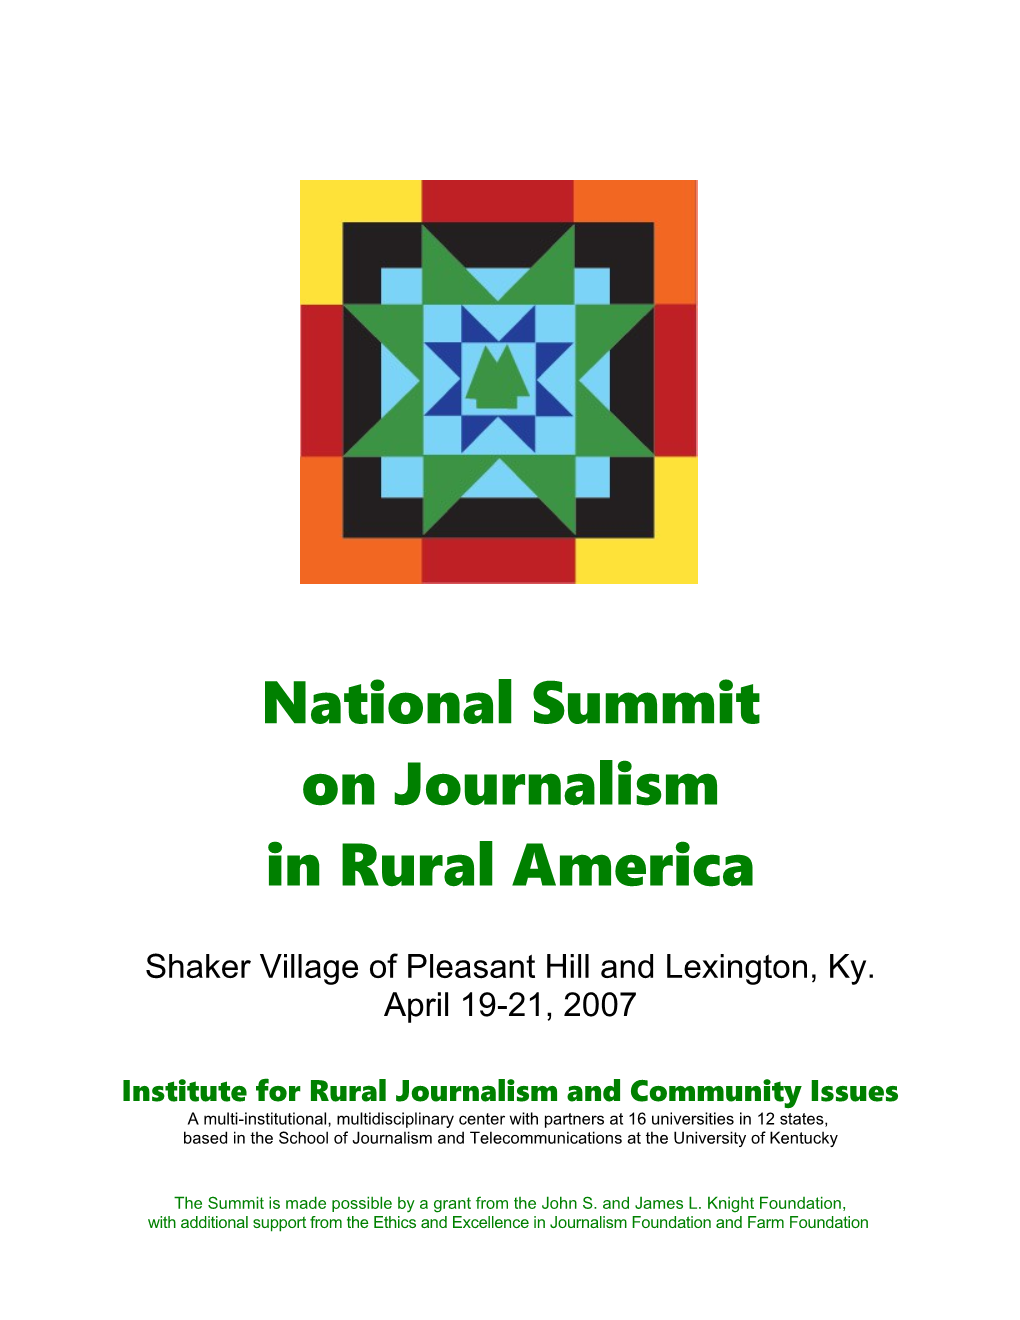 Institute for Rural Journalism and Community Issues